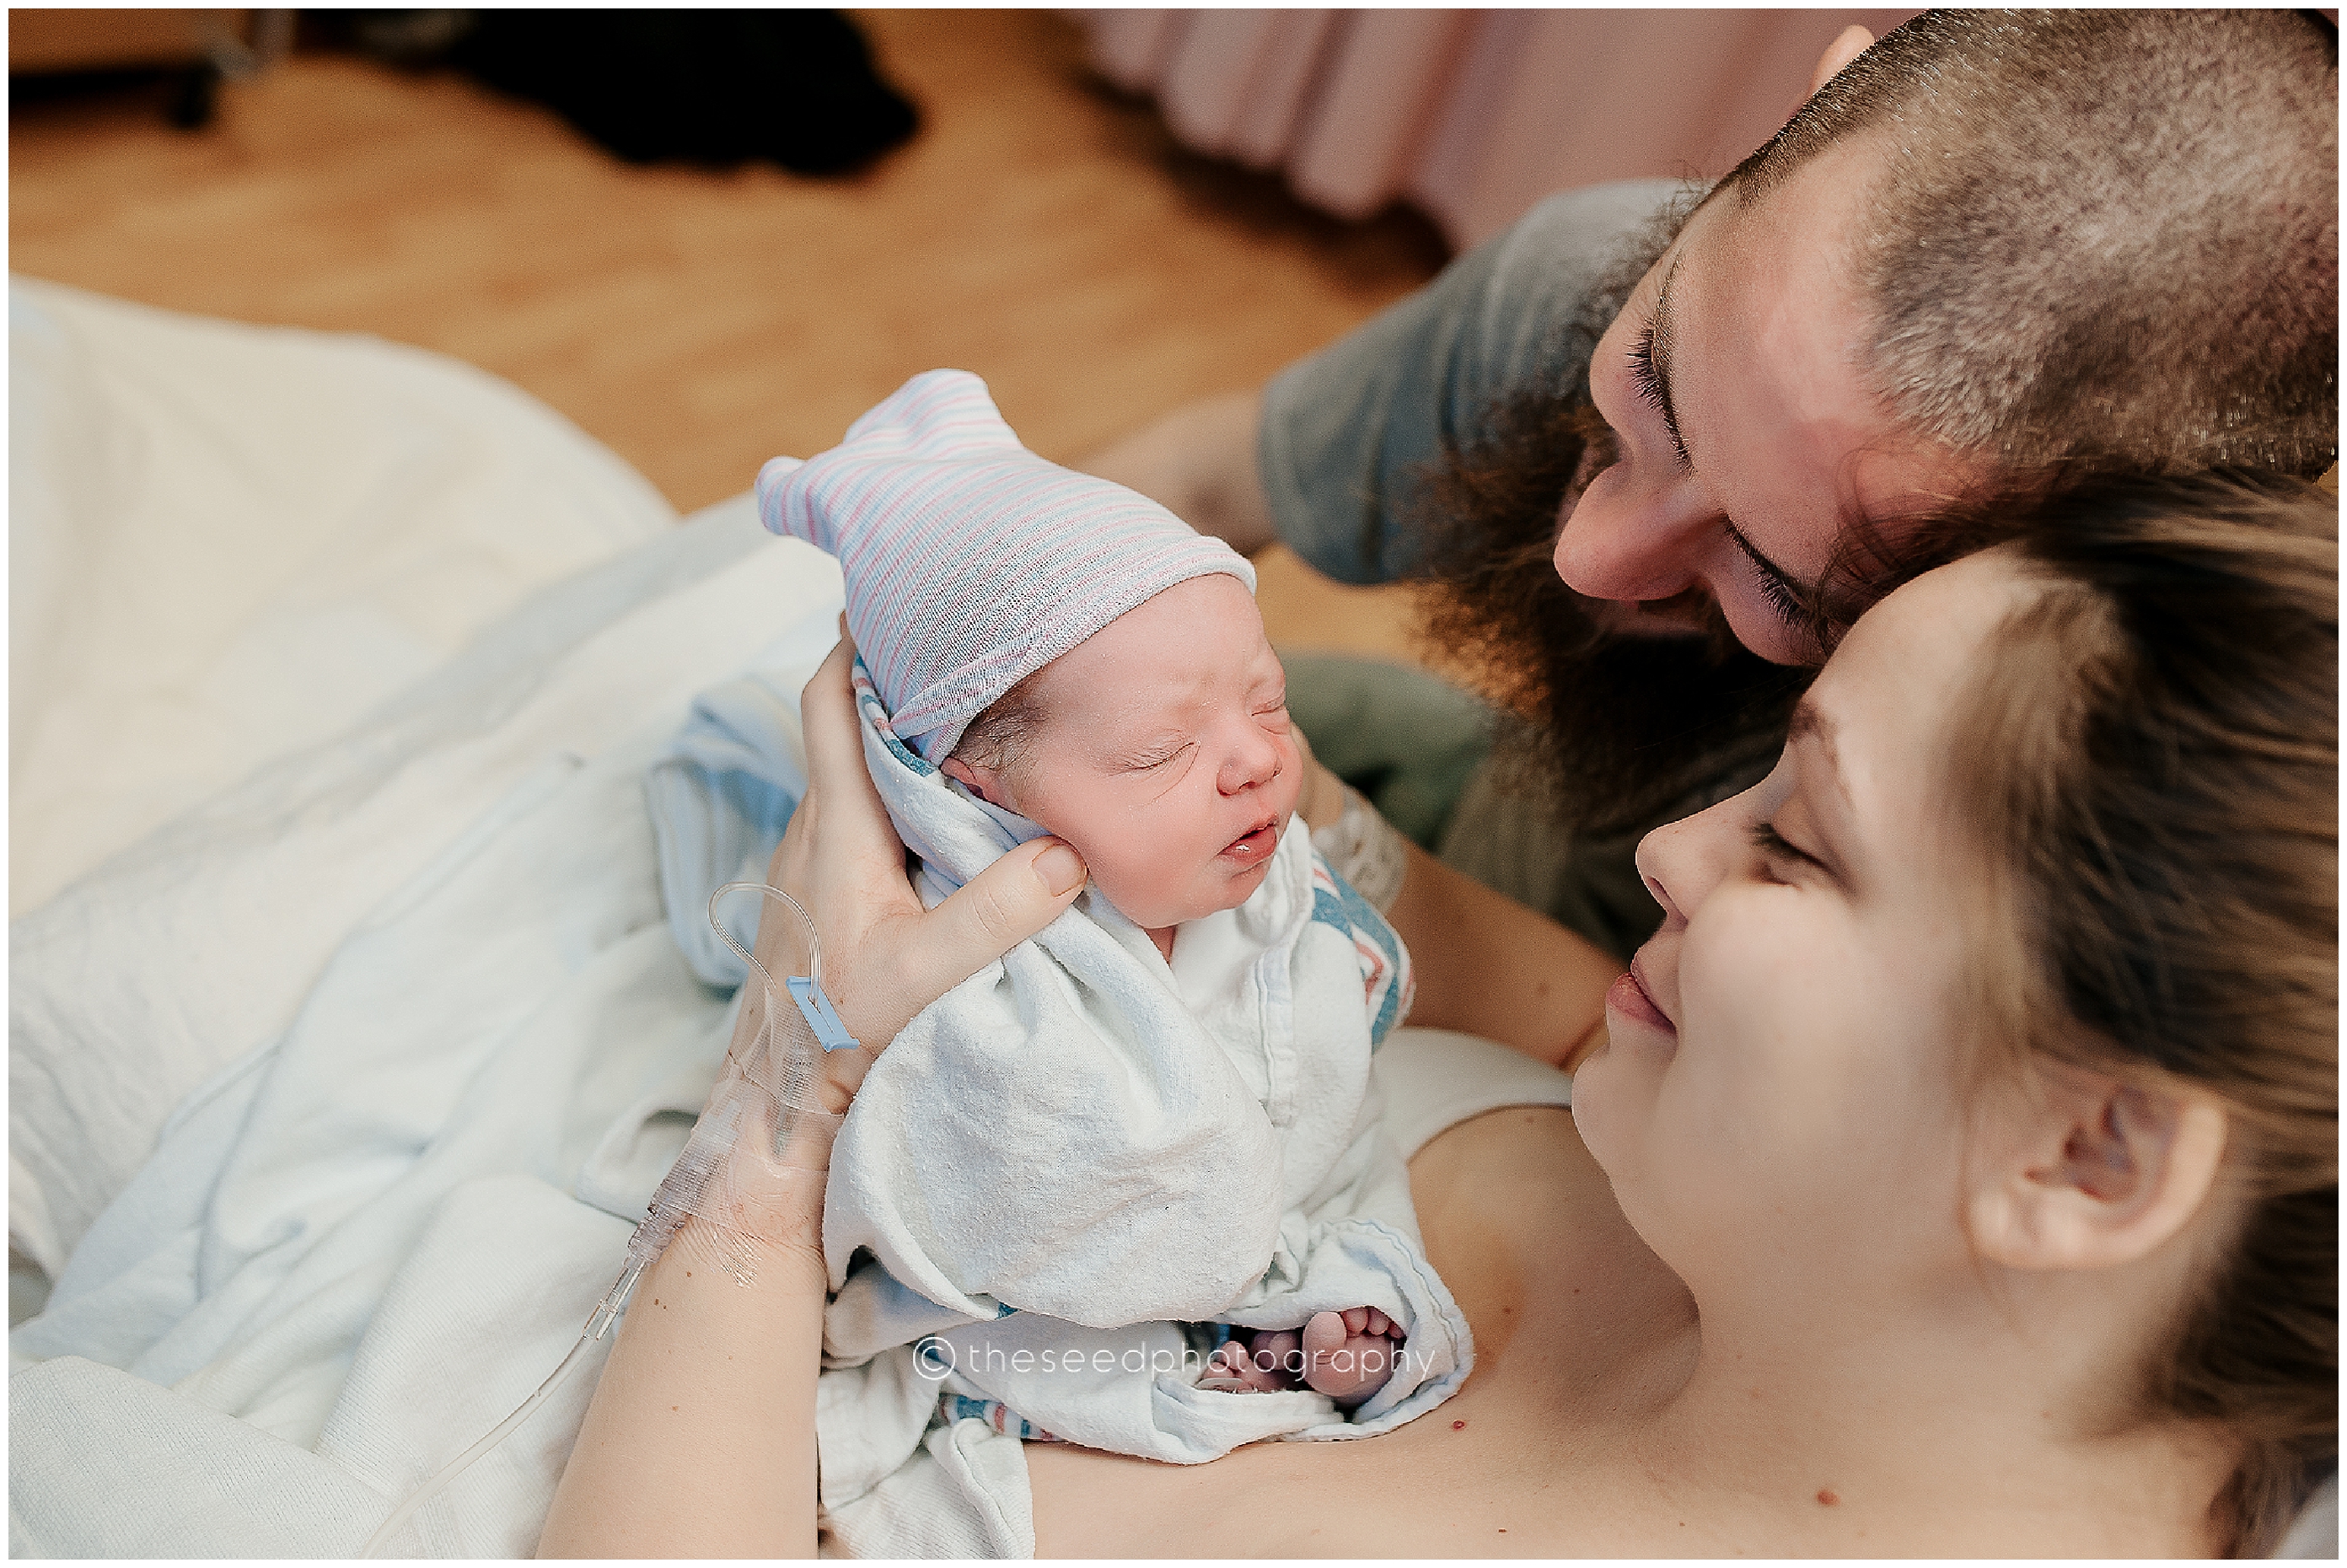 The Seed Photography, Akron Birth Photographer, Aultman Orrville Birth Center